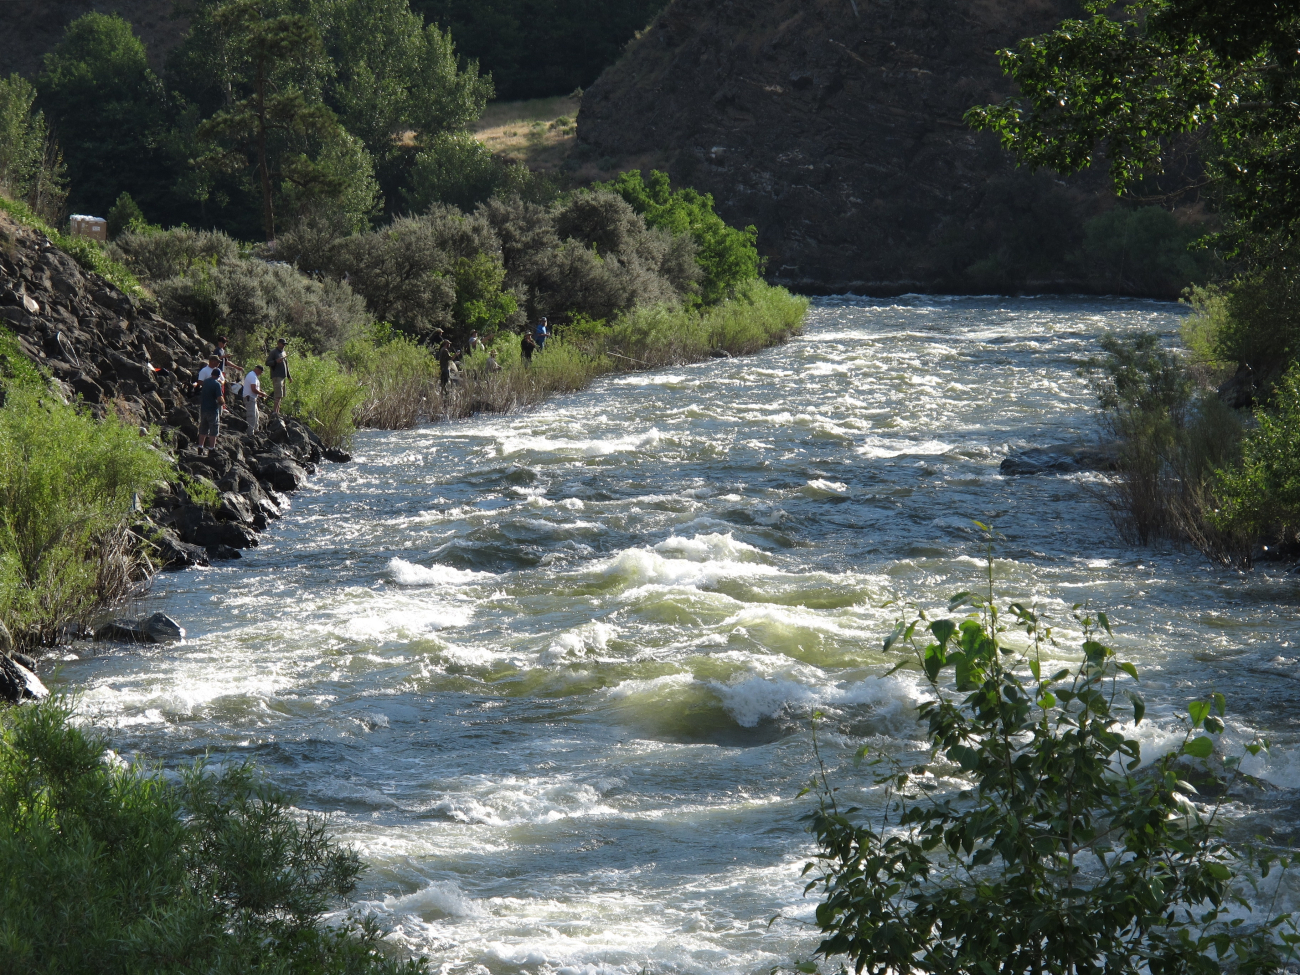 Fishermen line the bank of the Little Salmon River